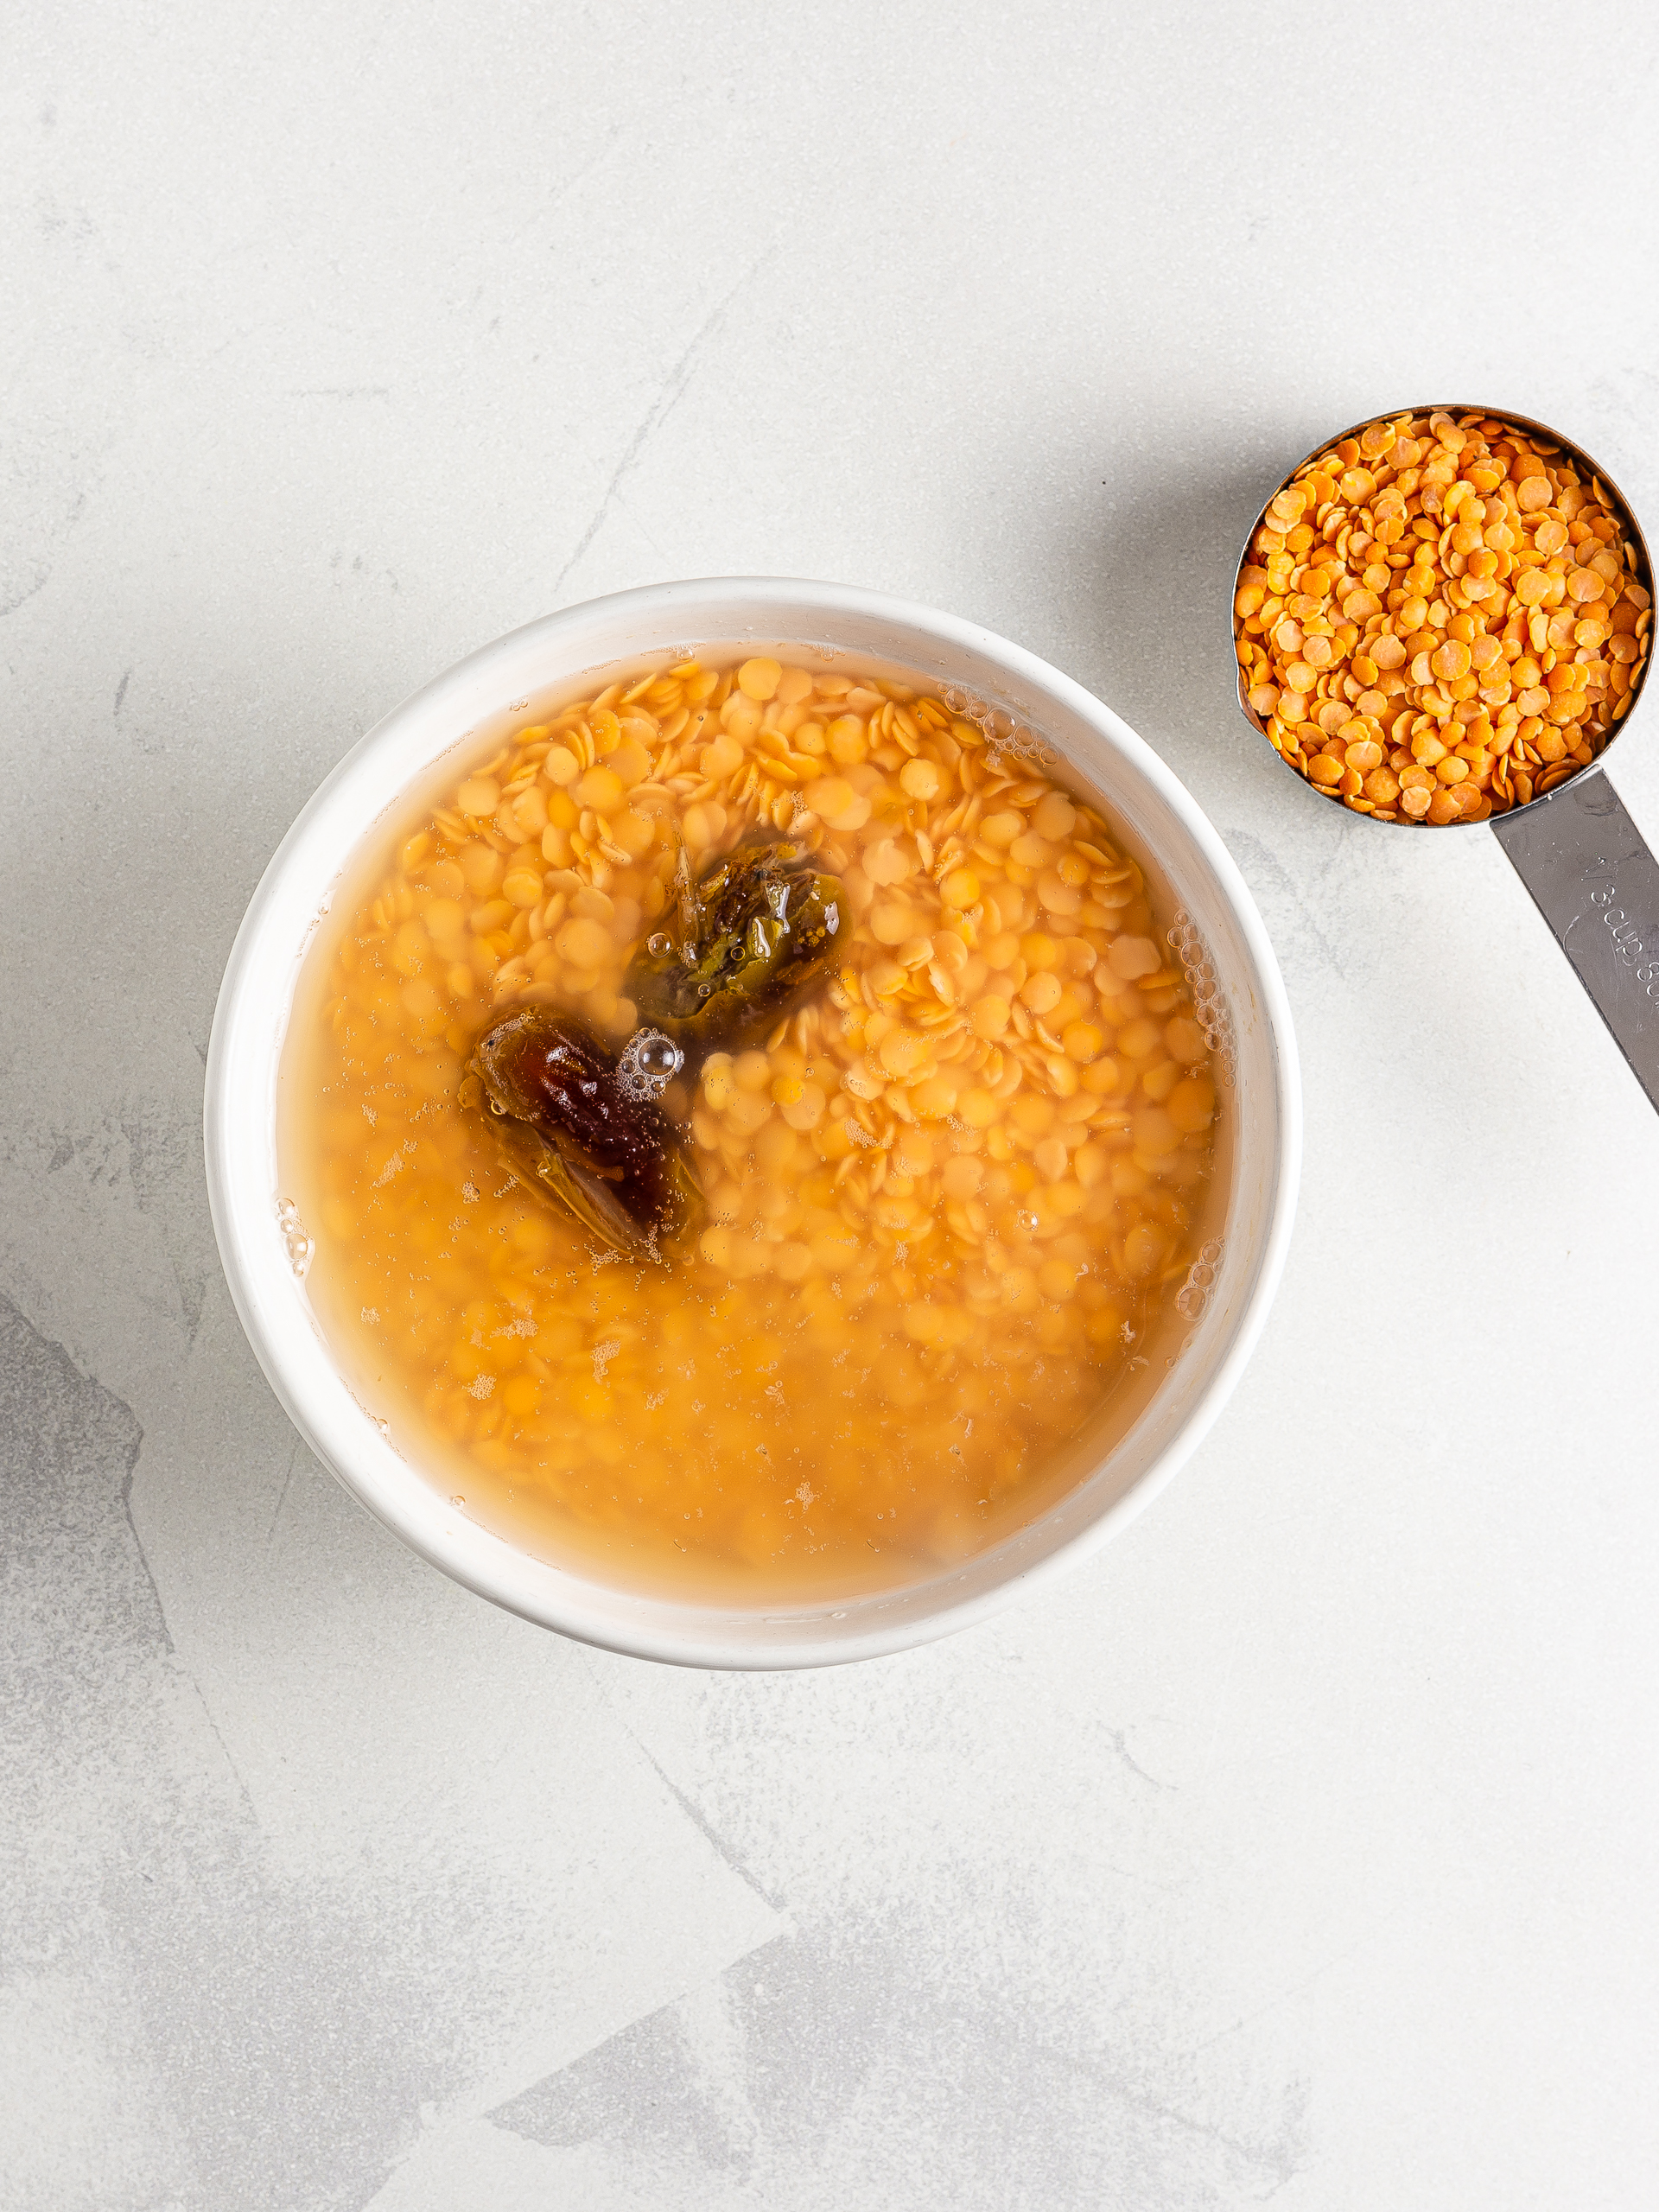 red lentils soaked in water with dates